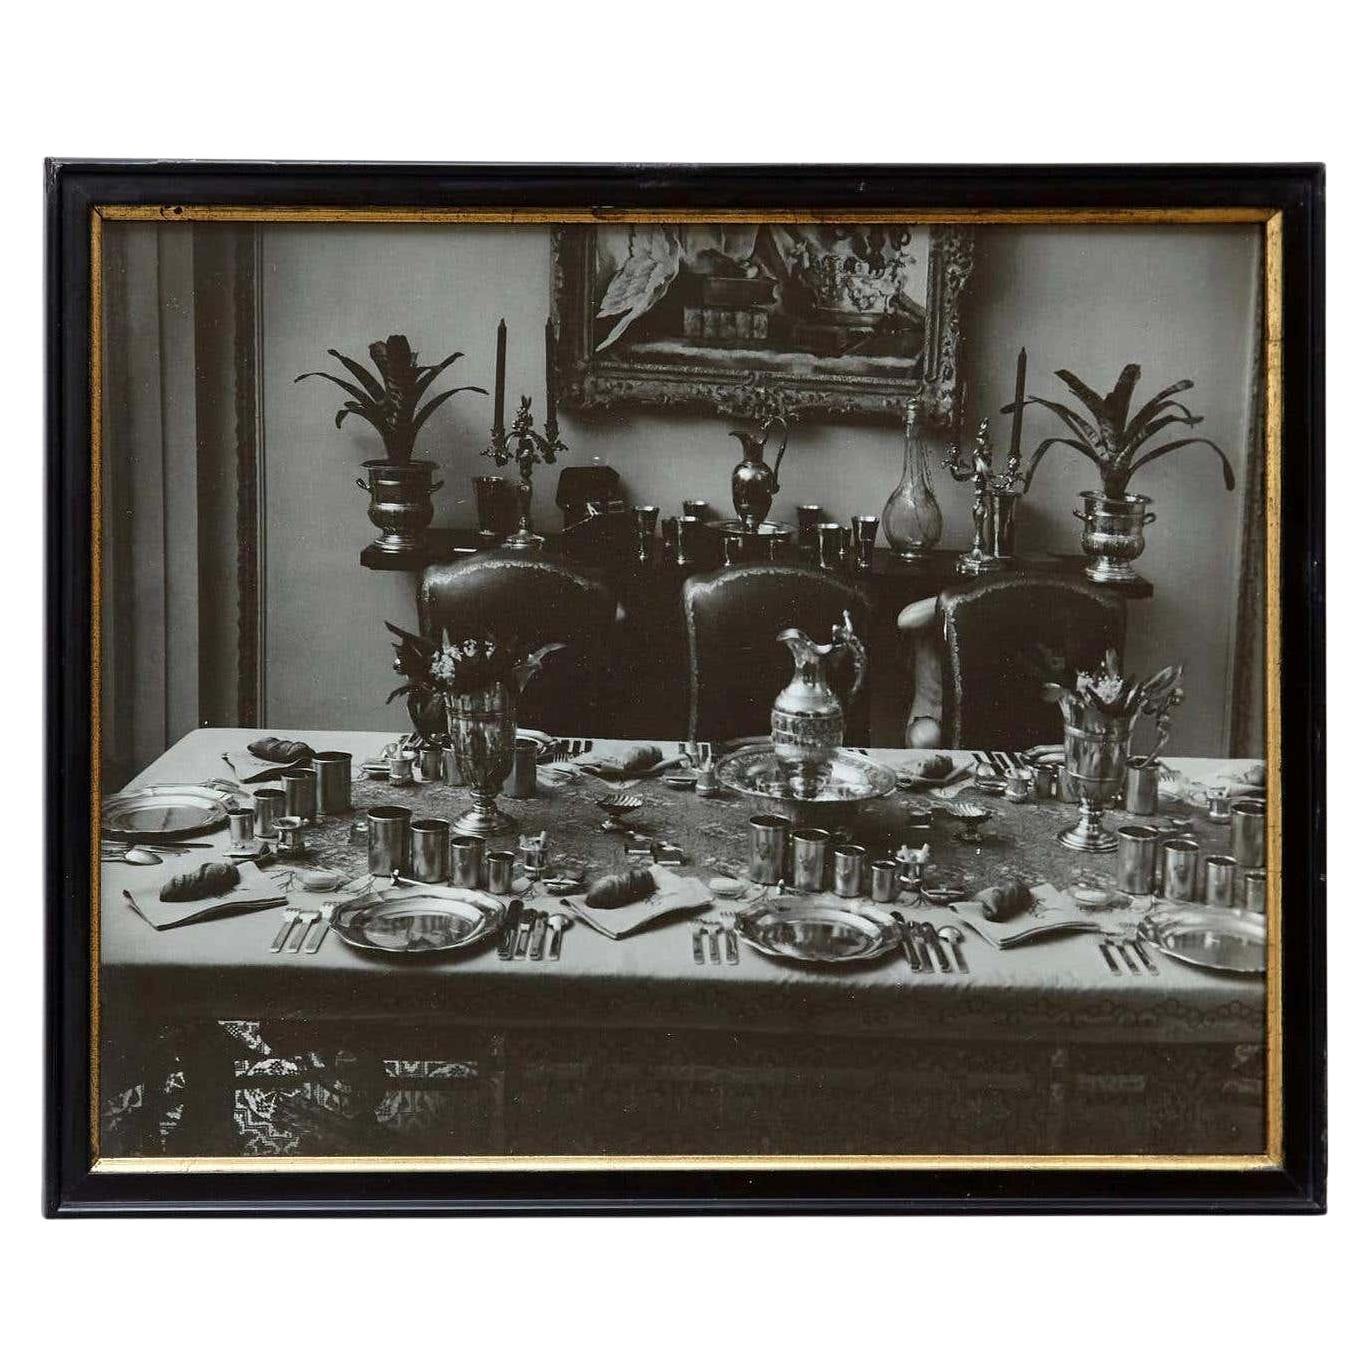 Brassai Black and White Framed Photography, circa 1936 For Sale